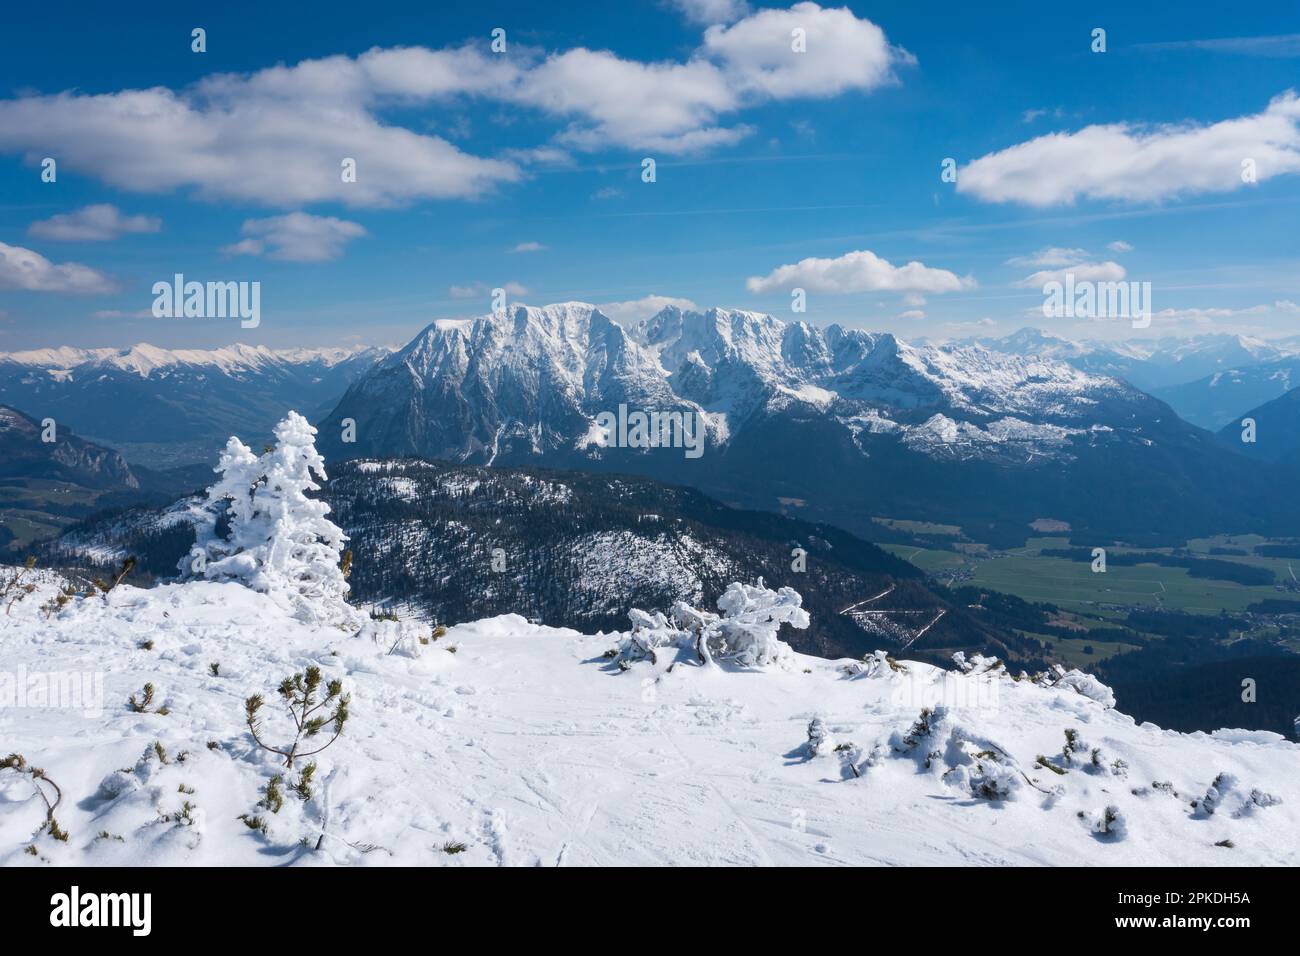 Grimming mountain in the Ennstal region in Styria. View from the Tauplitz Alm ski resort during winter and springtime. Stock Photo